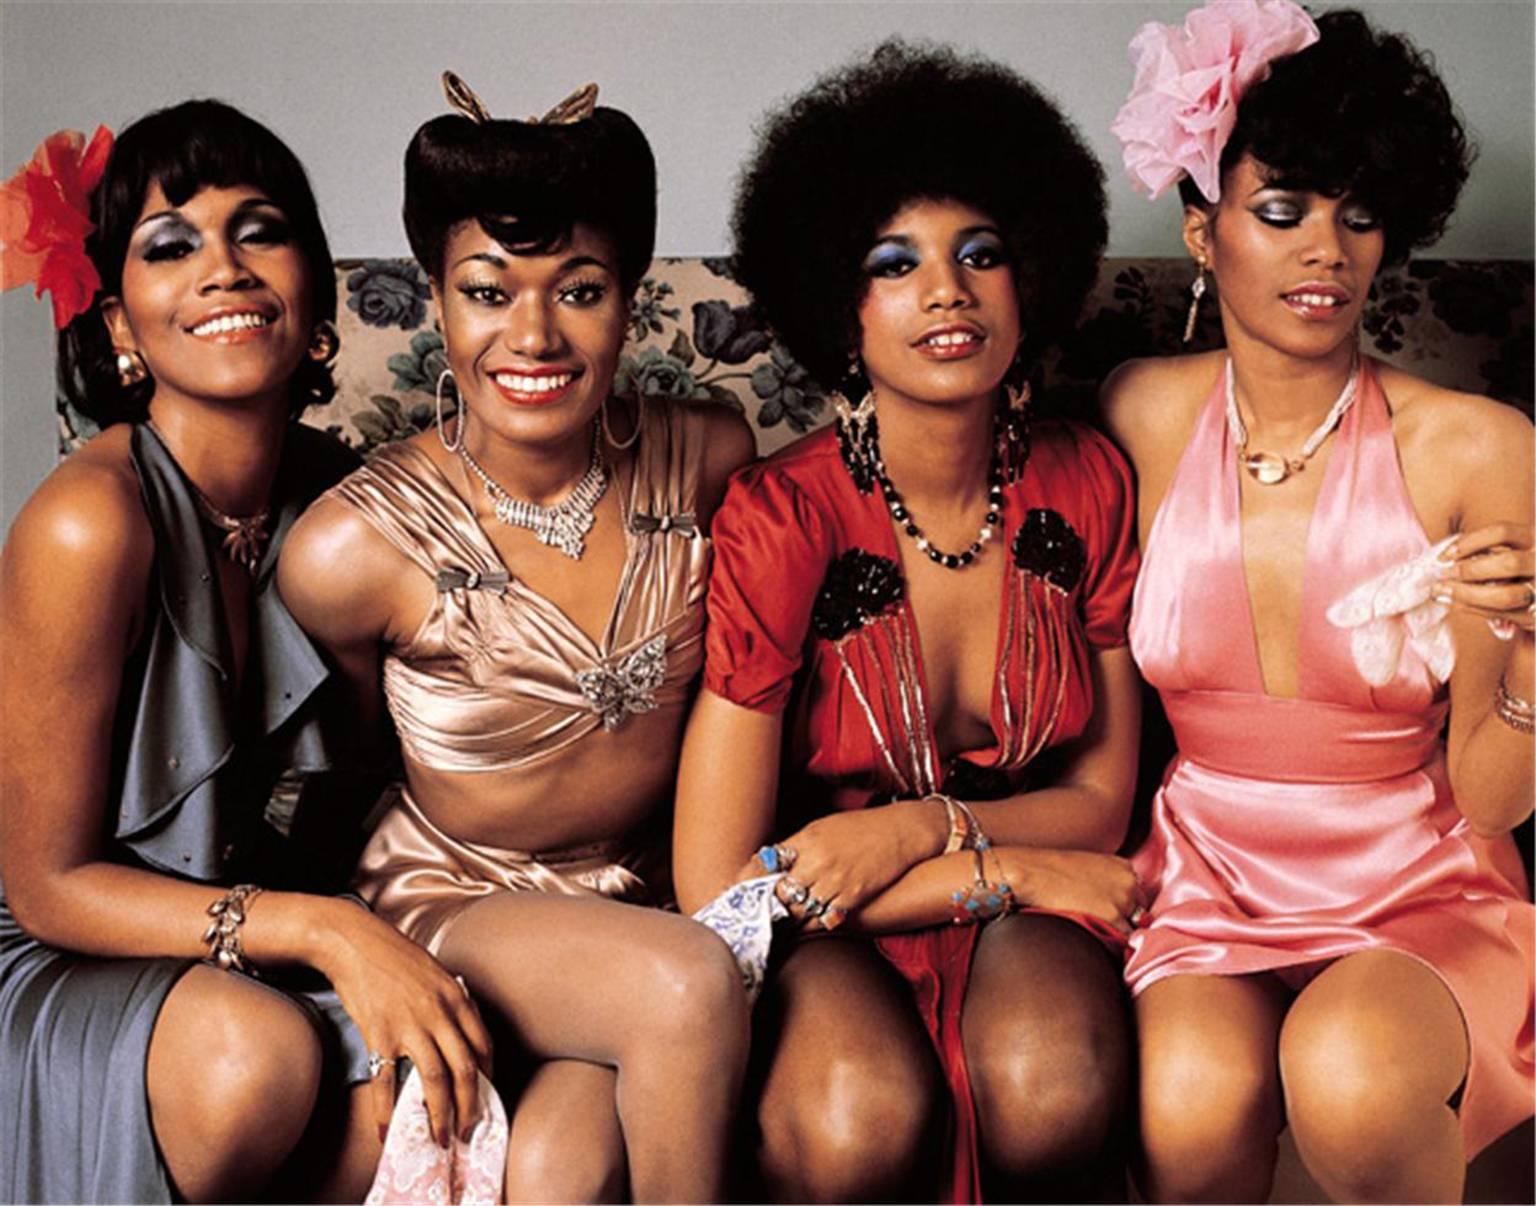 Mick Rock Color Photograph - Pointer Sisters London, England 1973